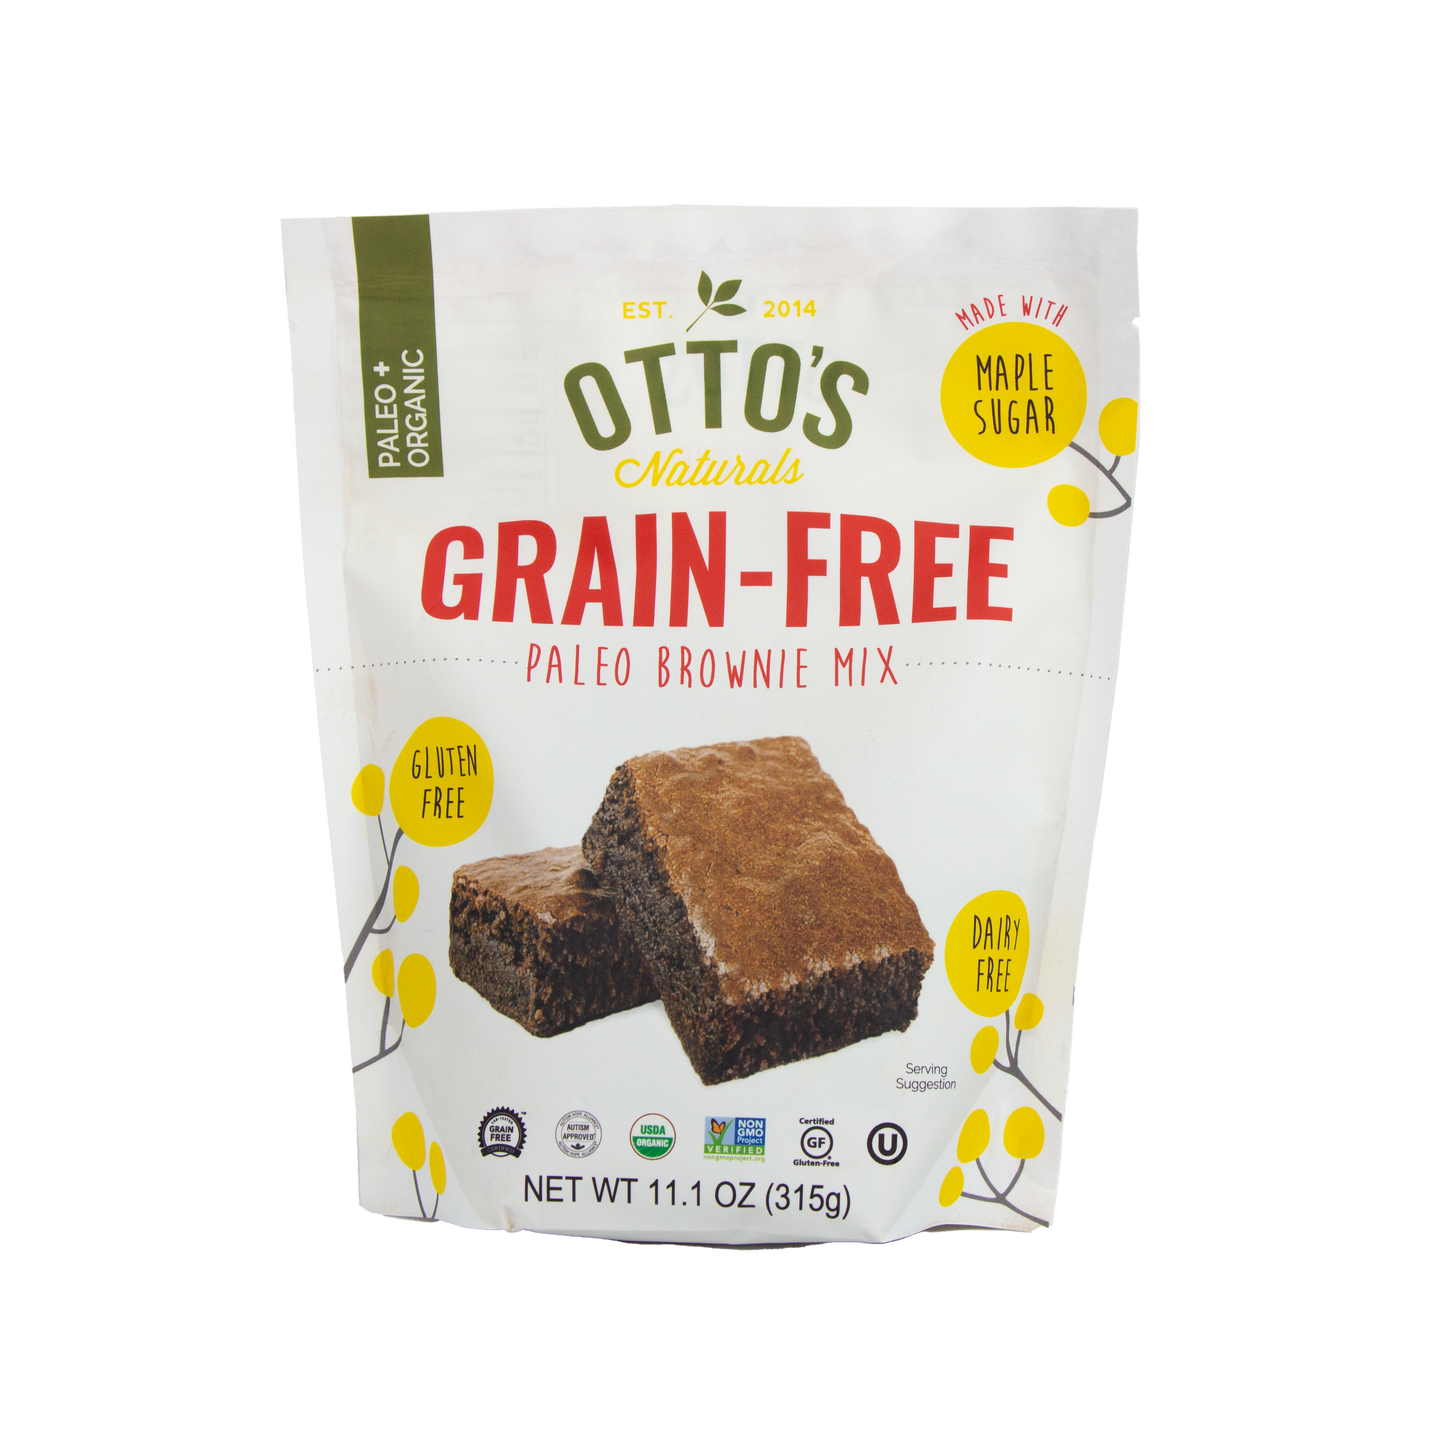 Otto's -Paleo Brownie Mix - With Maple Sugar